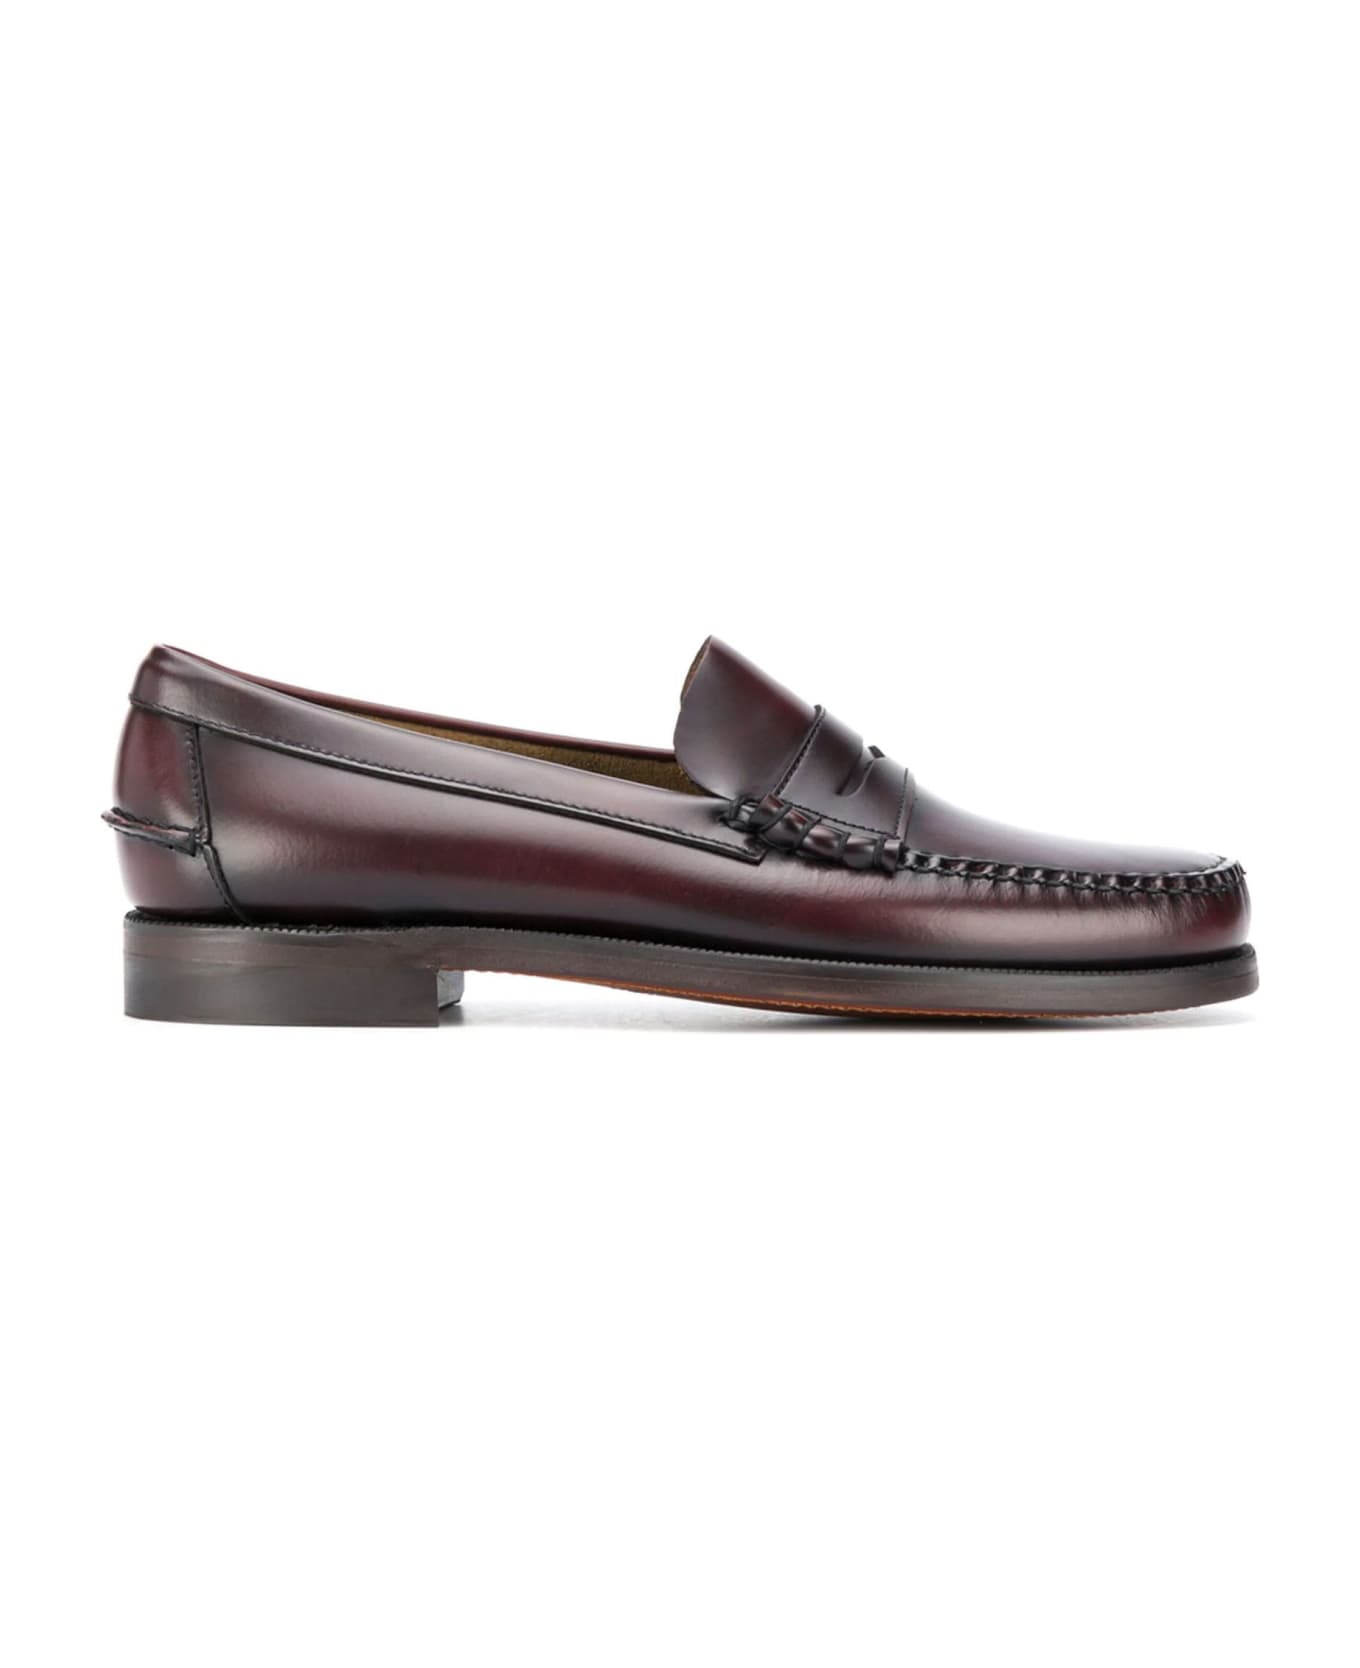 Sebago Brown Leather Loafers - Brown